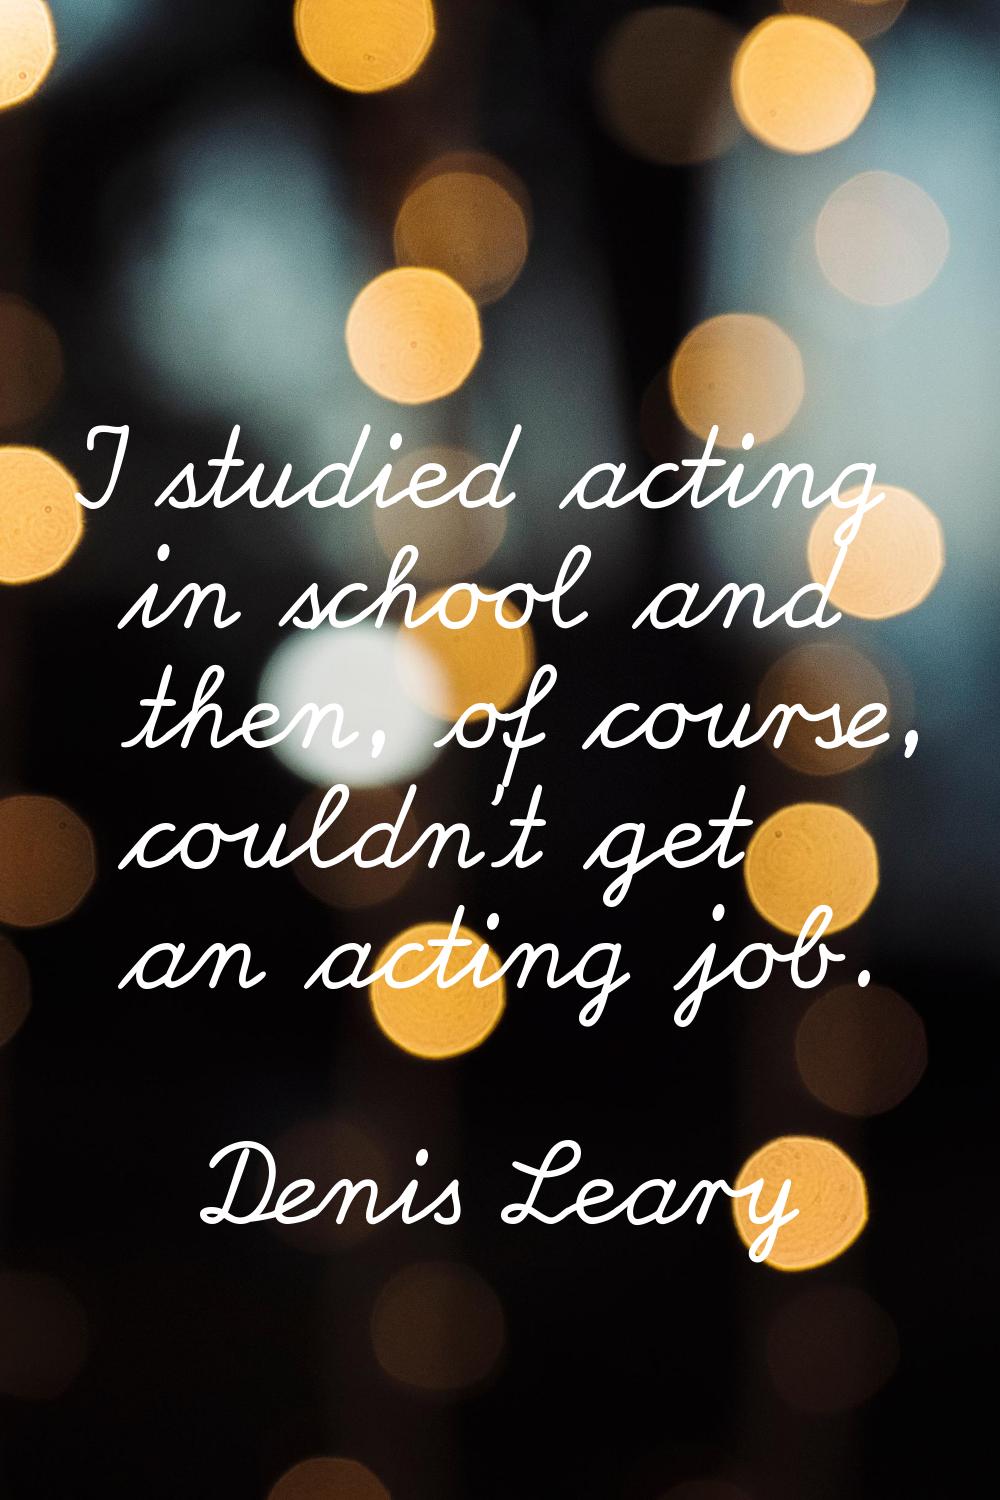 I studied acting in school and then, of course, couldn't get an acting job.